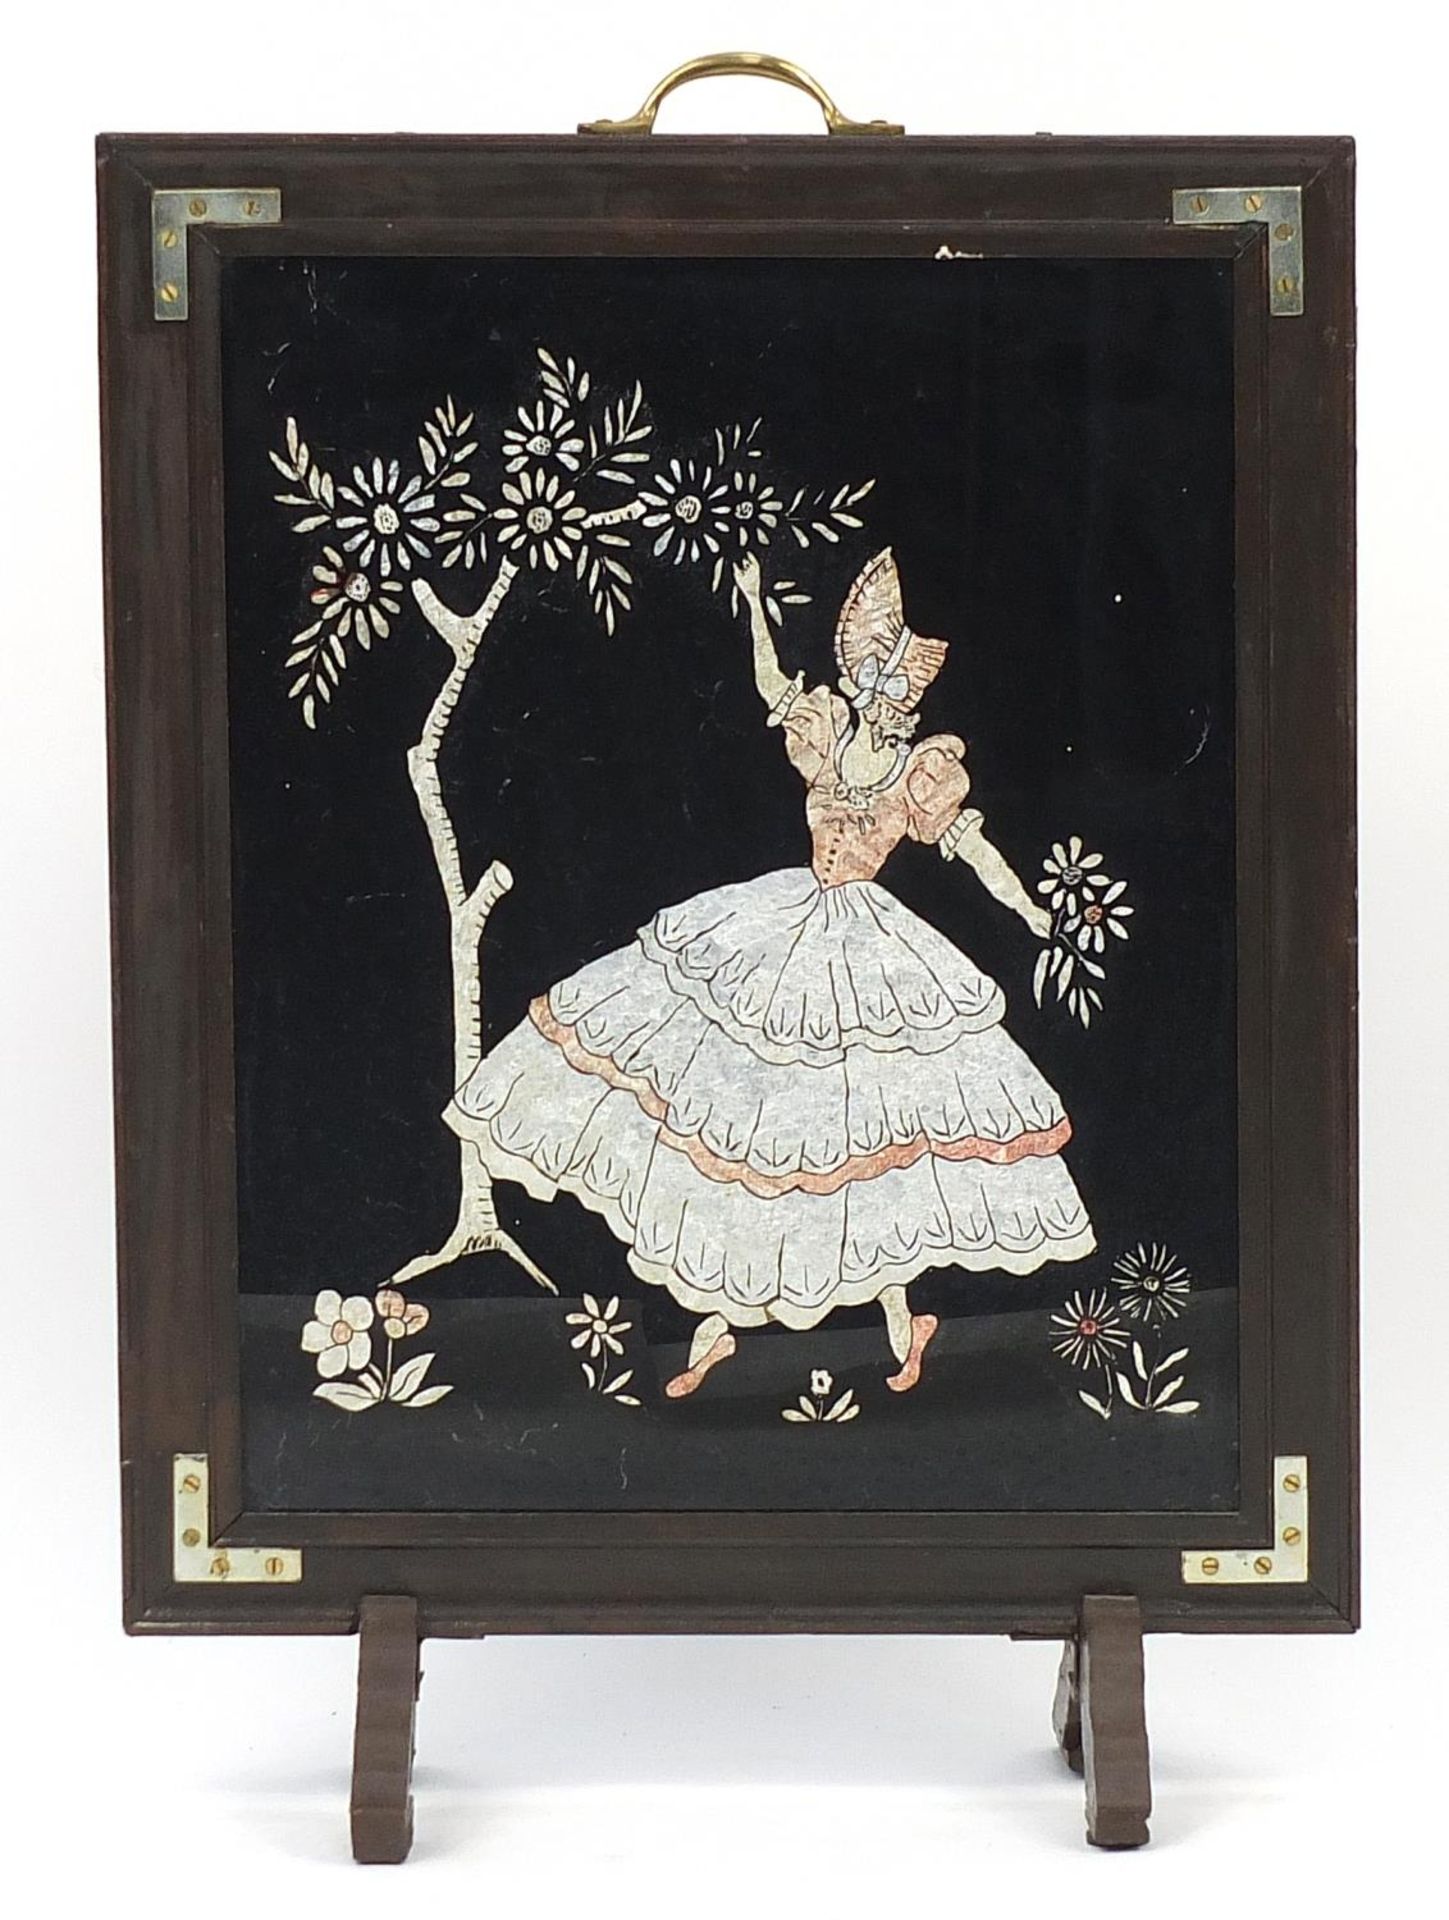 Mahogany foil backed glass fire screen depicting a crinoline lady picking flowers, 70cm high x - Image 2 of 3